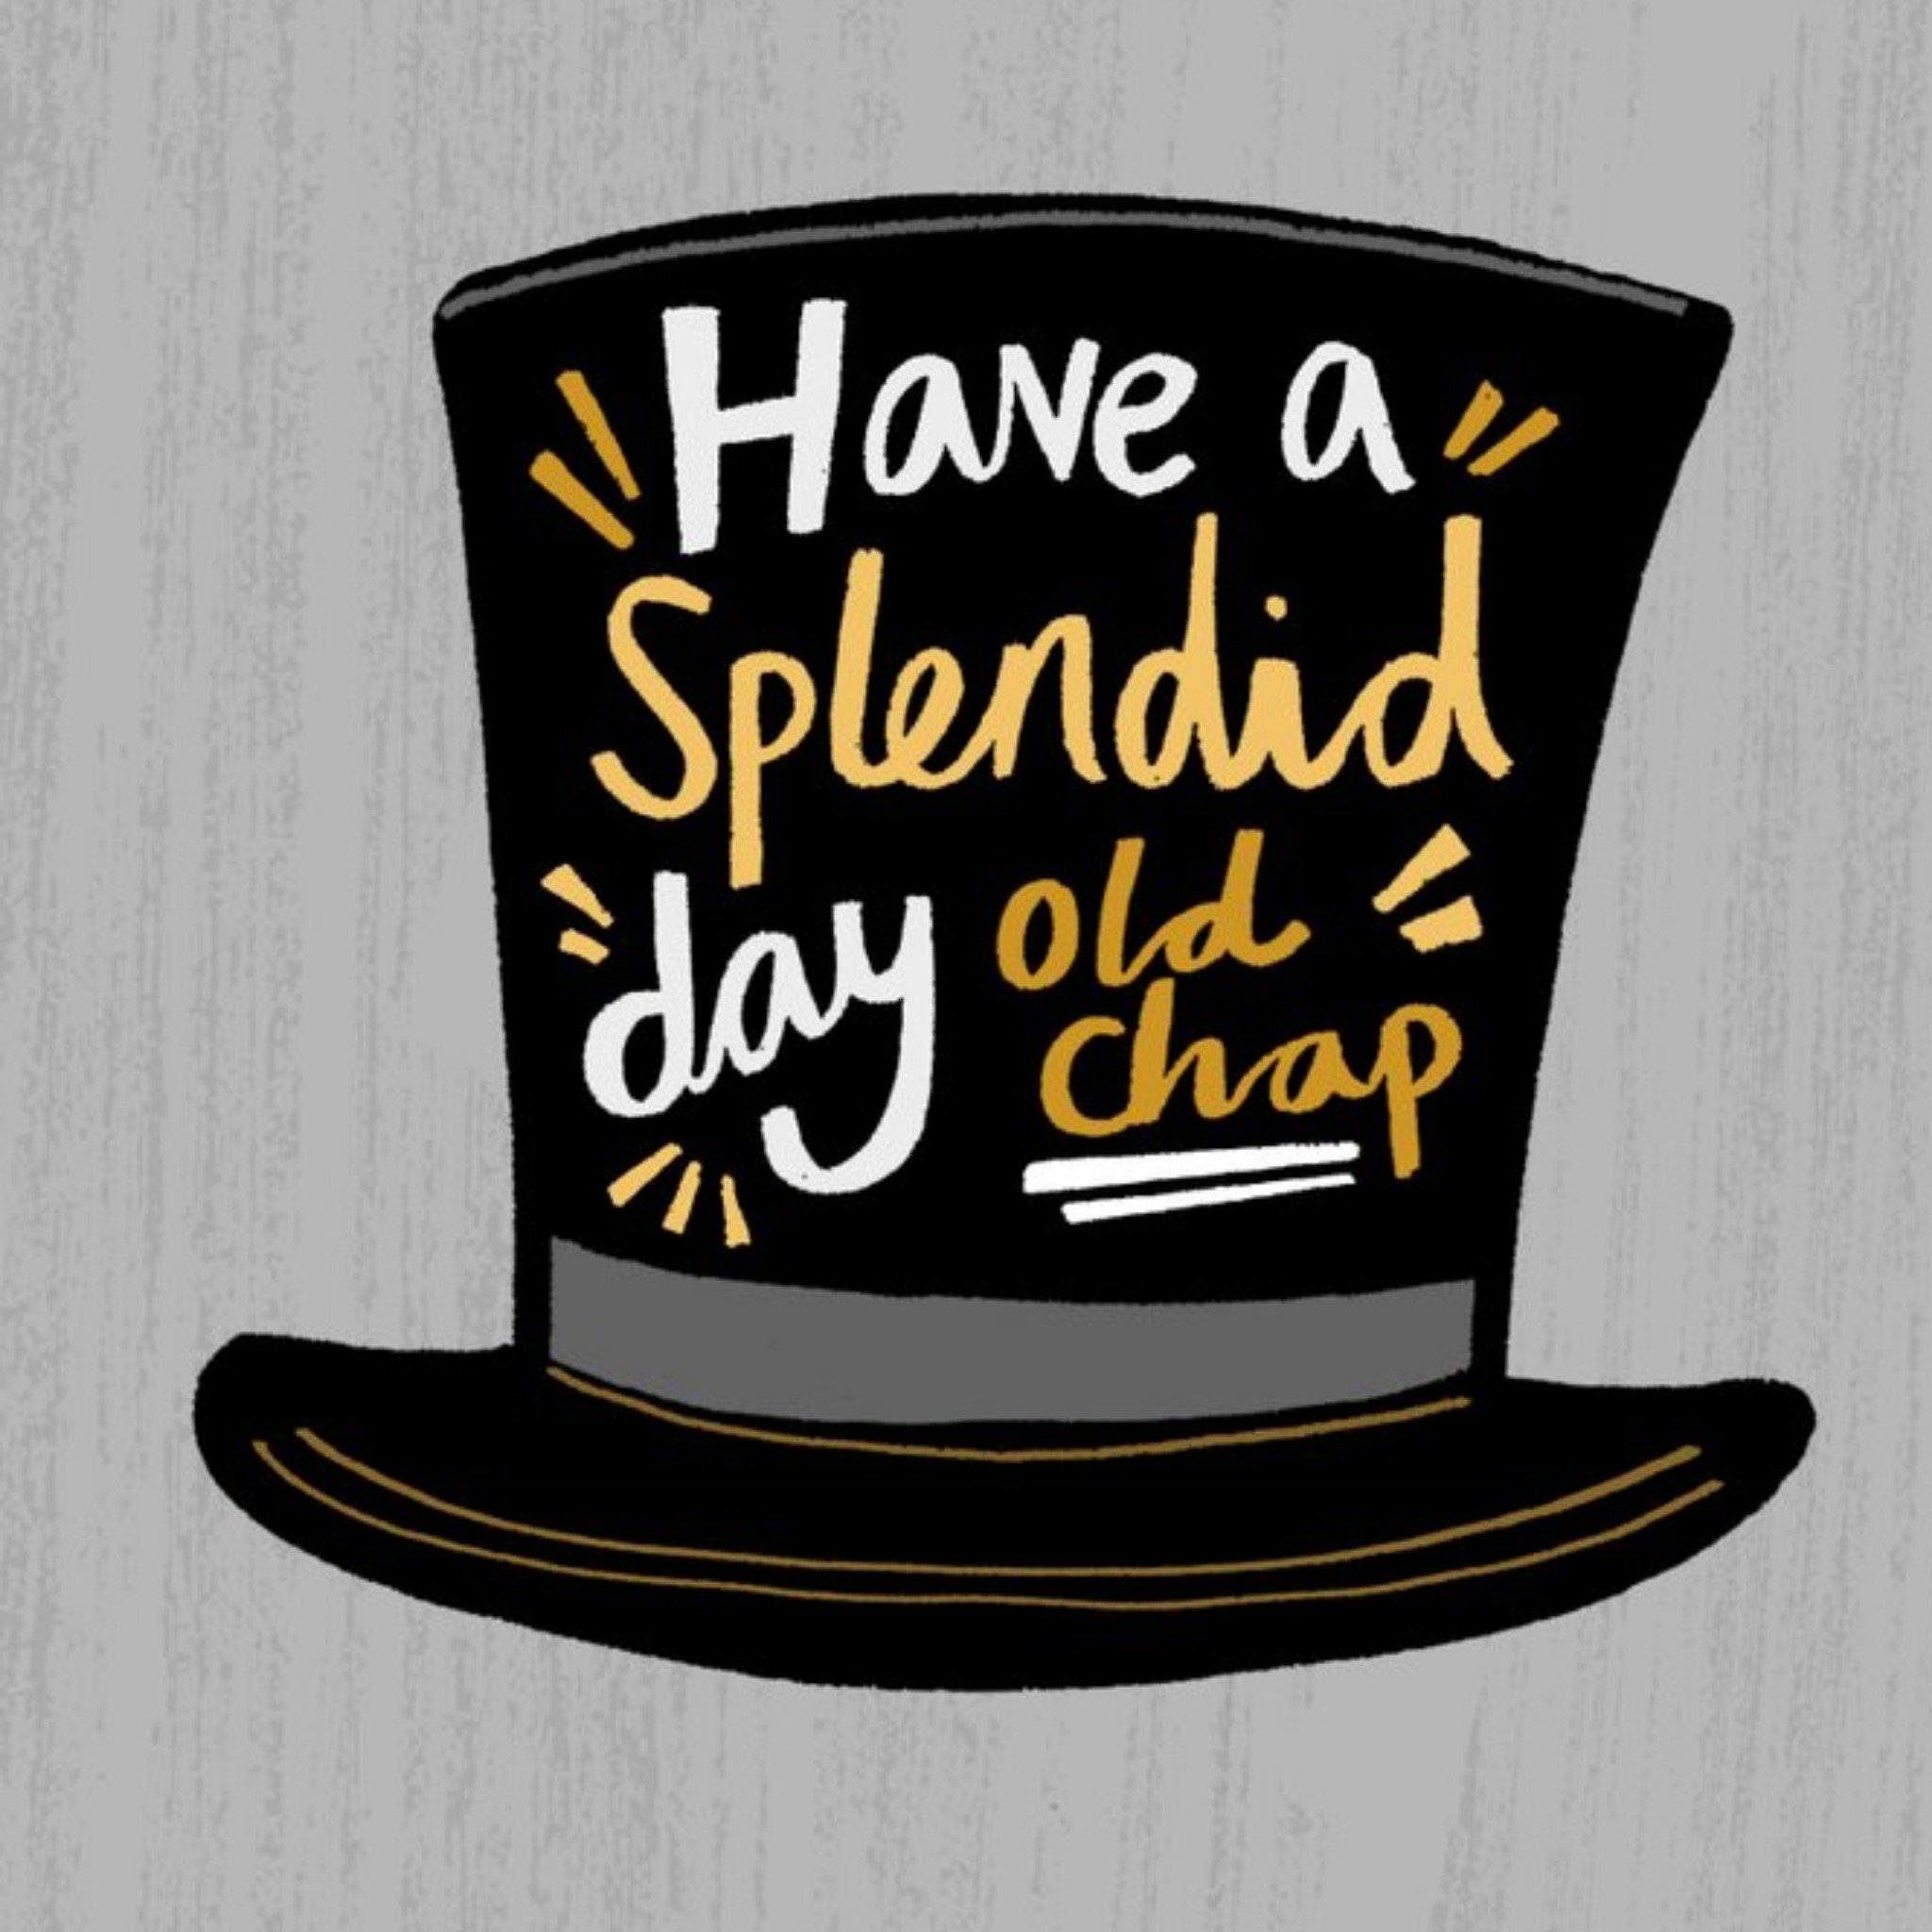 Moonpig Retro Top Hat Have A Splendid Day Old Chap Birthday Card, Large